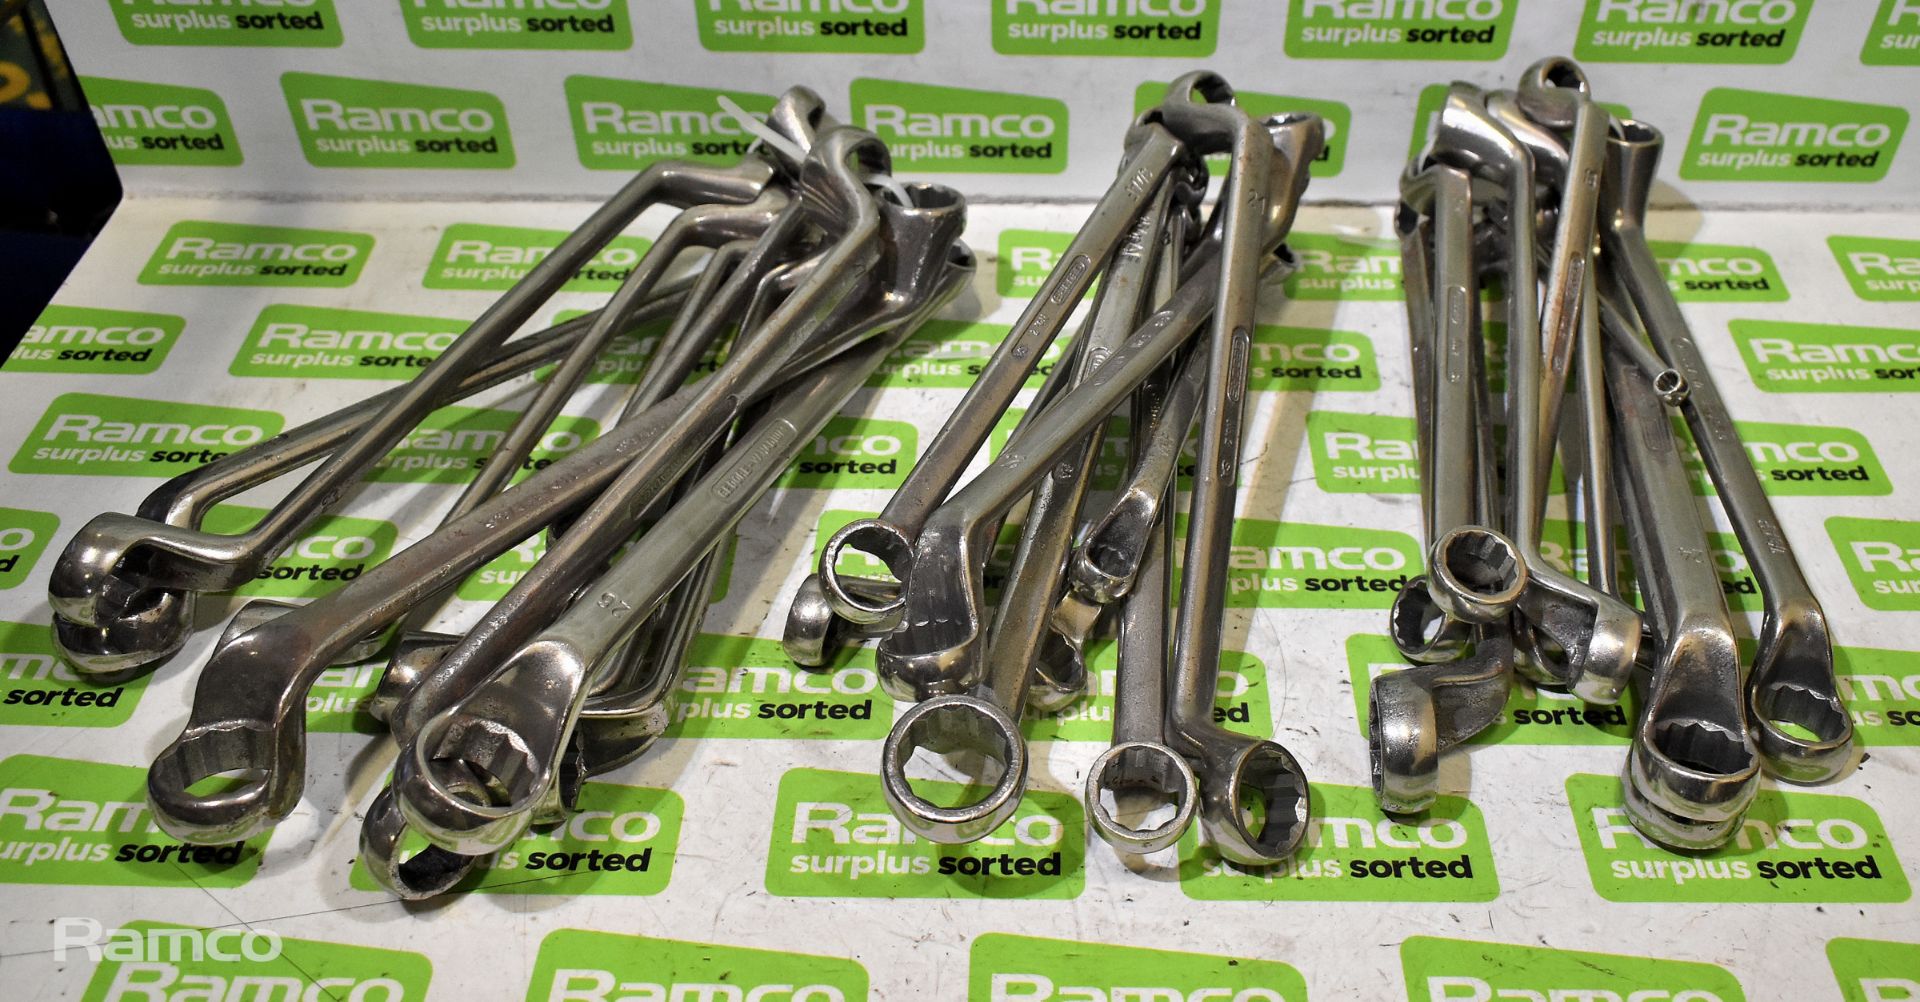 Ring spanners - various sizes